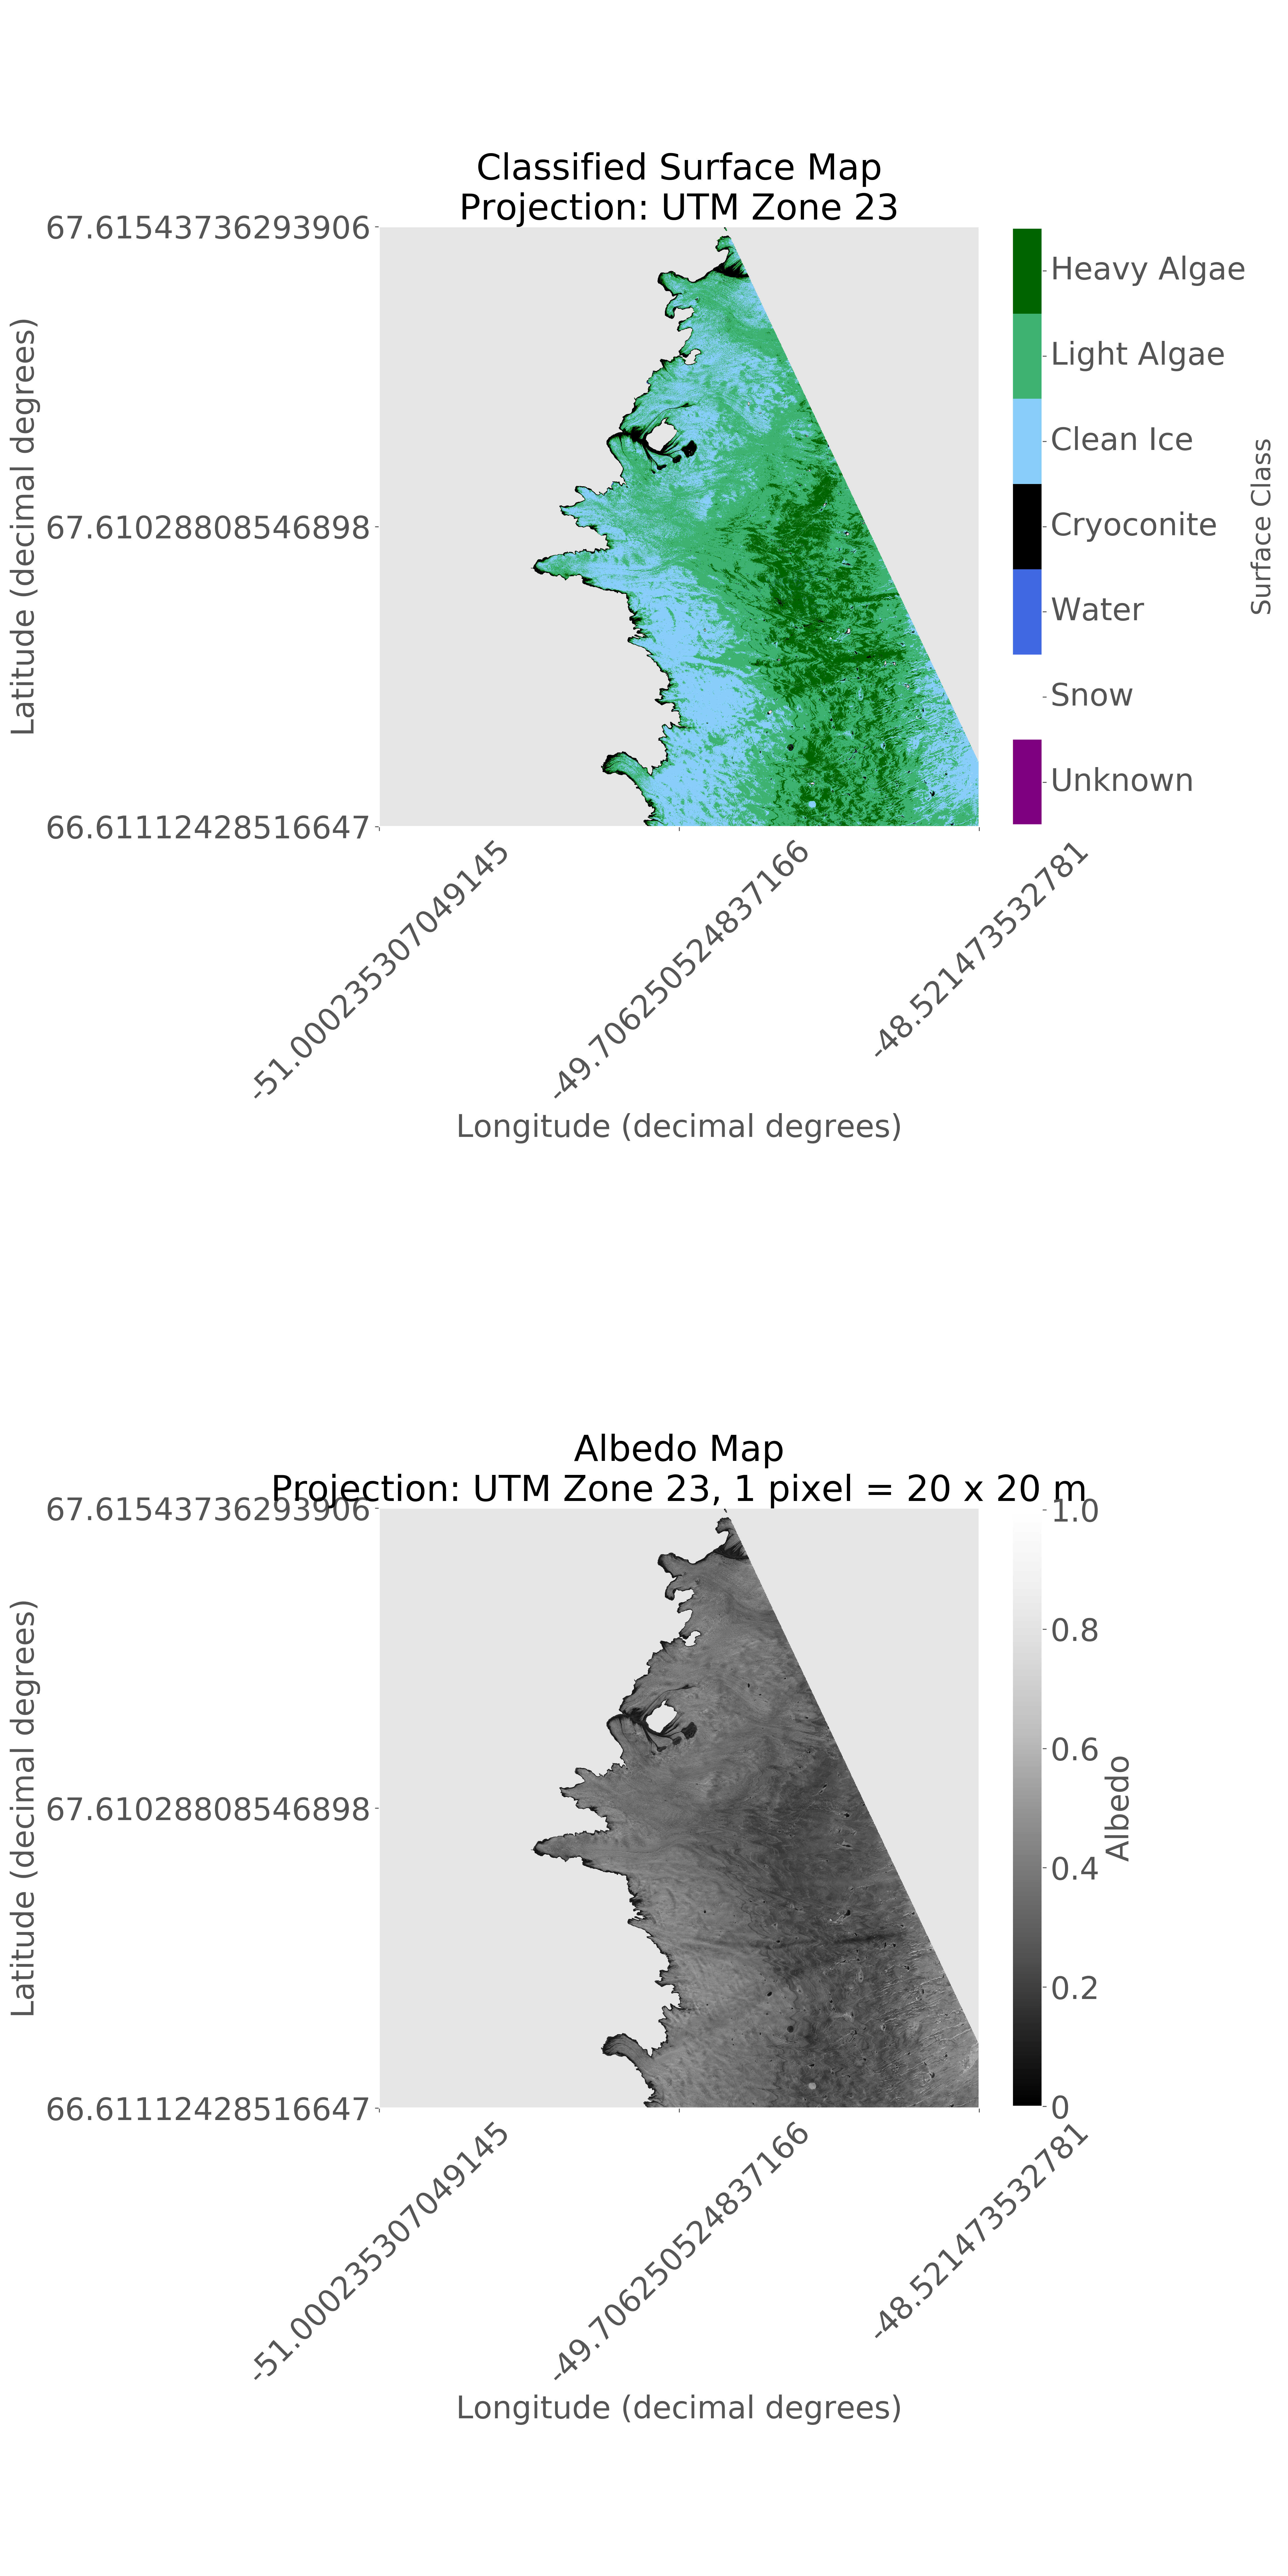 xarray's plot function output: top = classified surface, bottom = albedo map